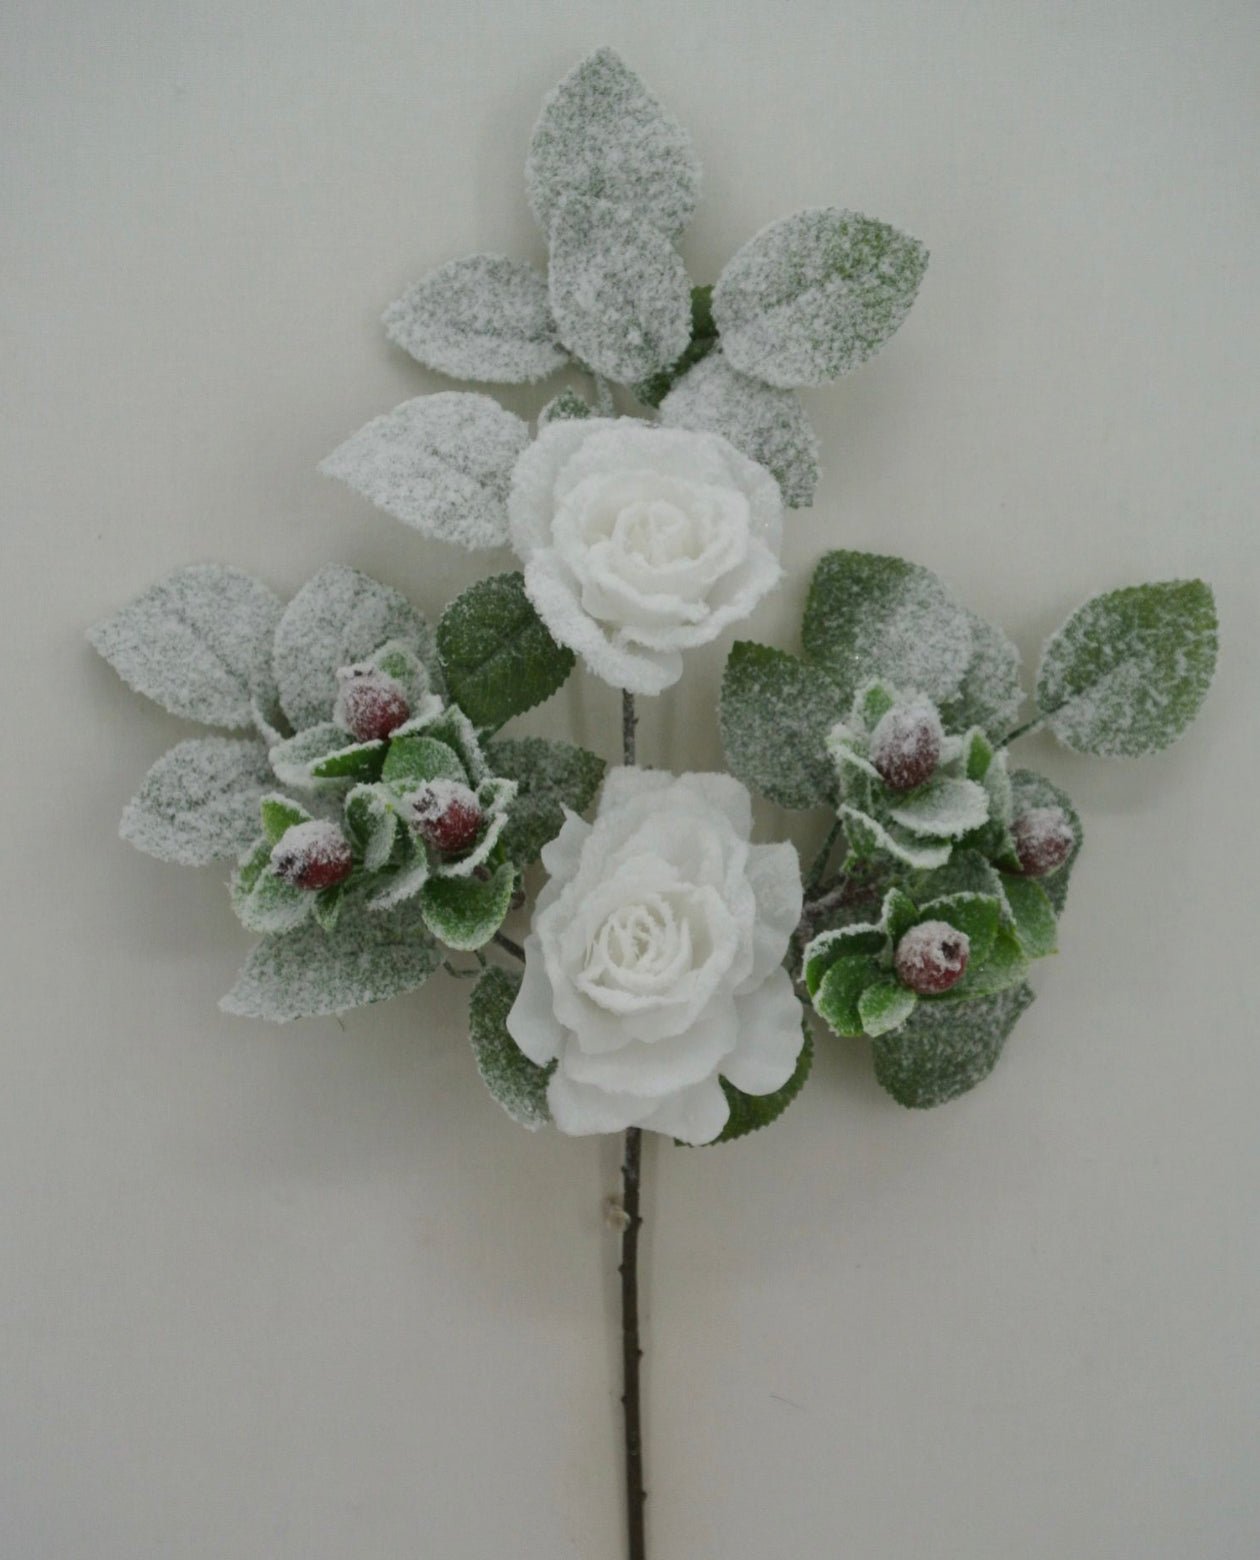 White rose and berry spray - Greenery Market83754-wt